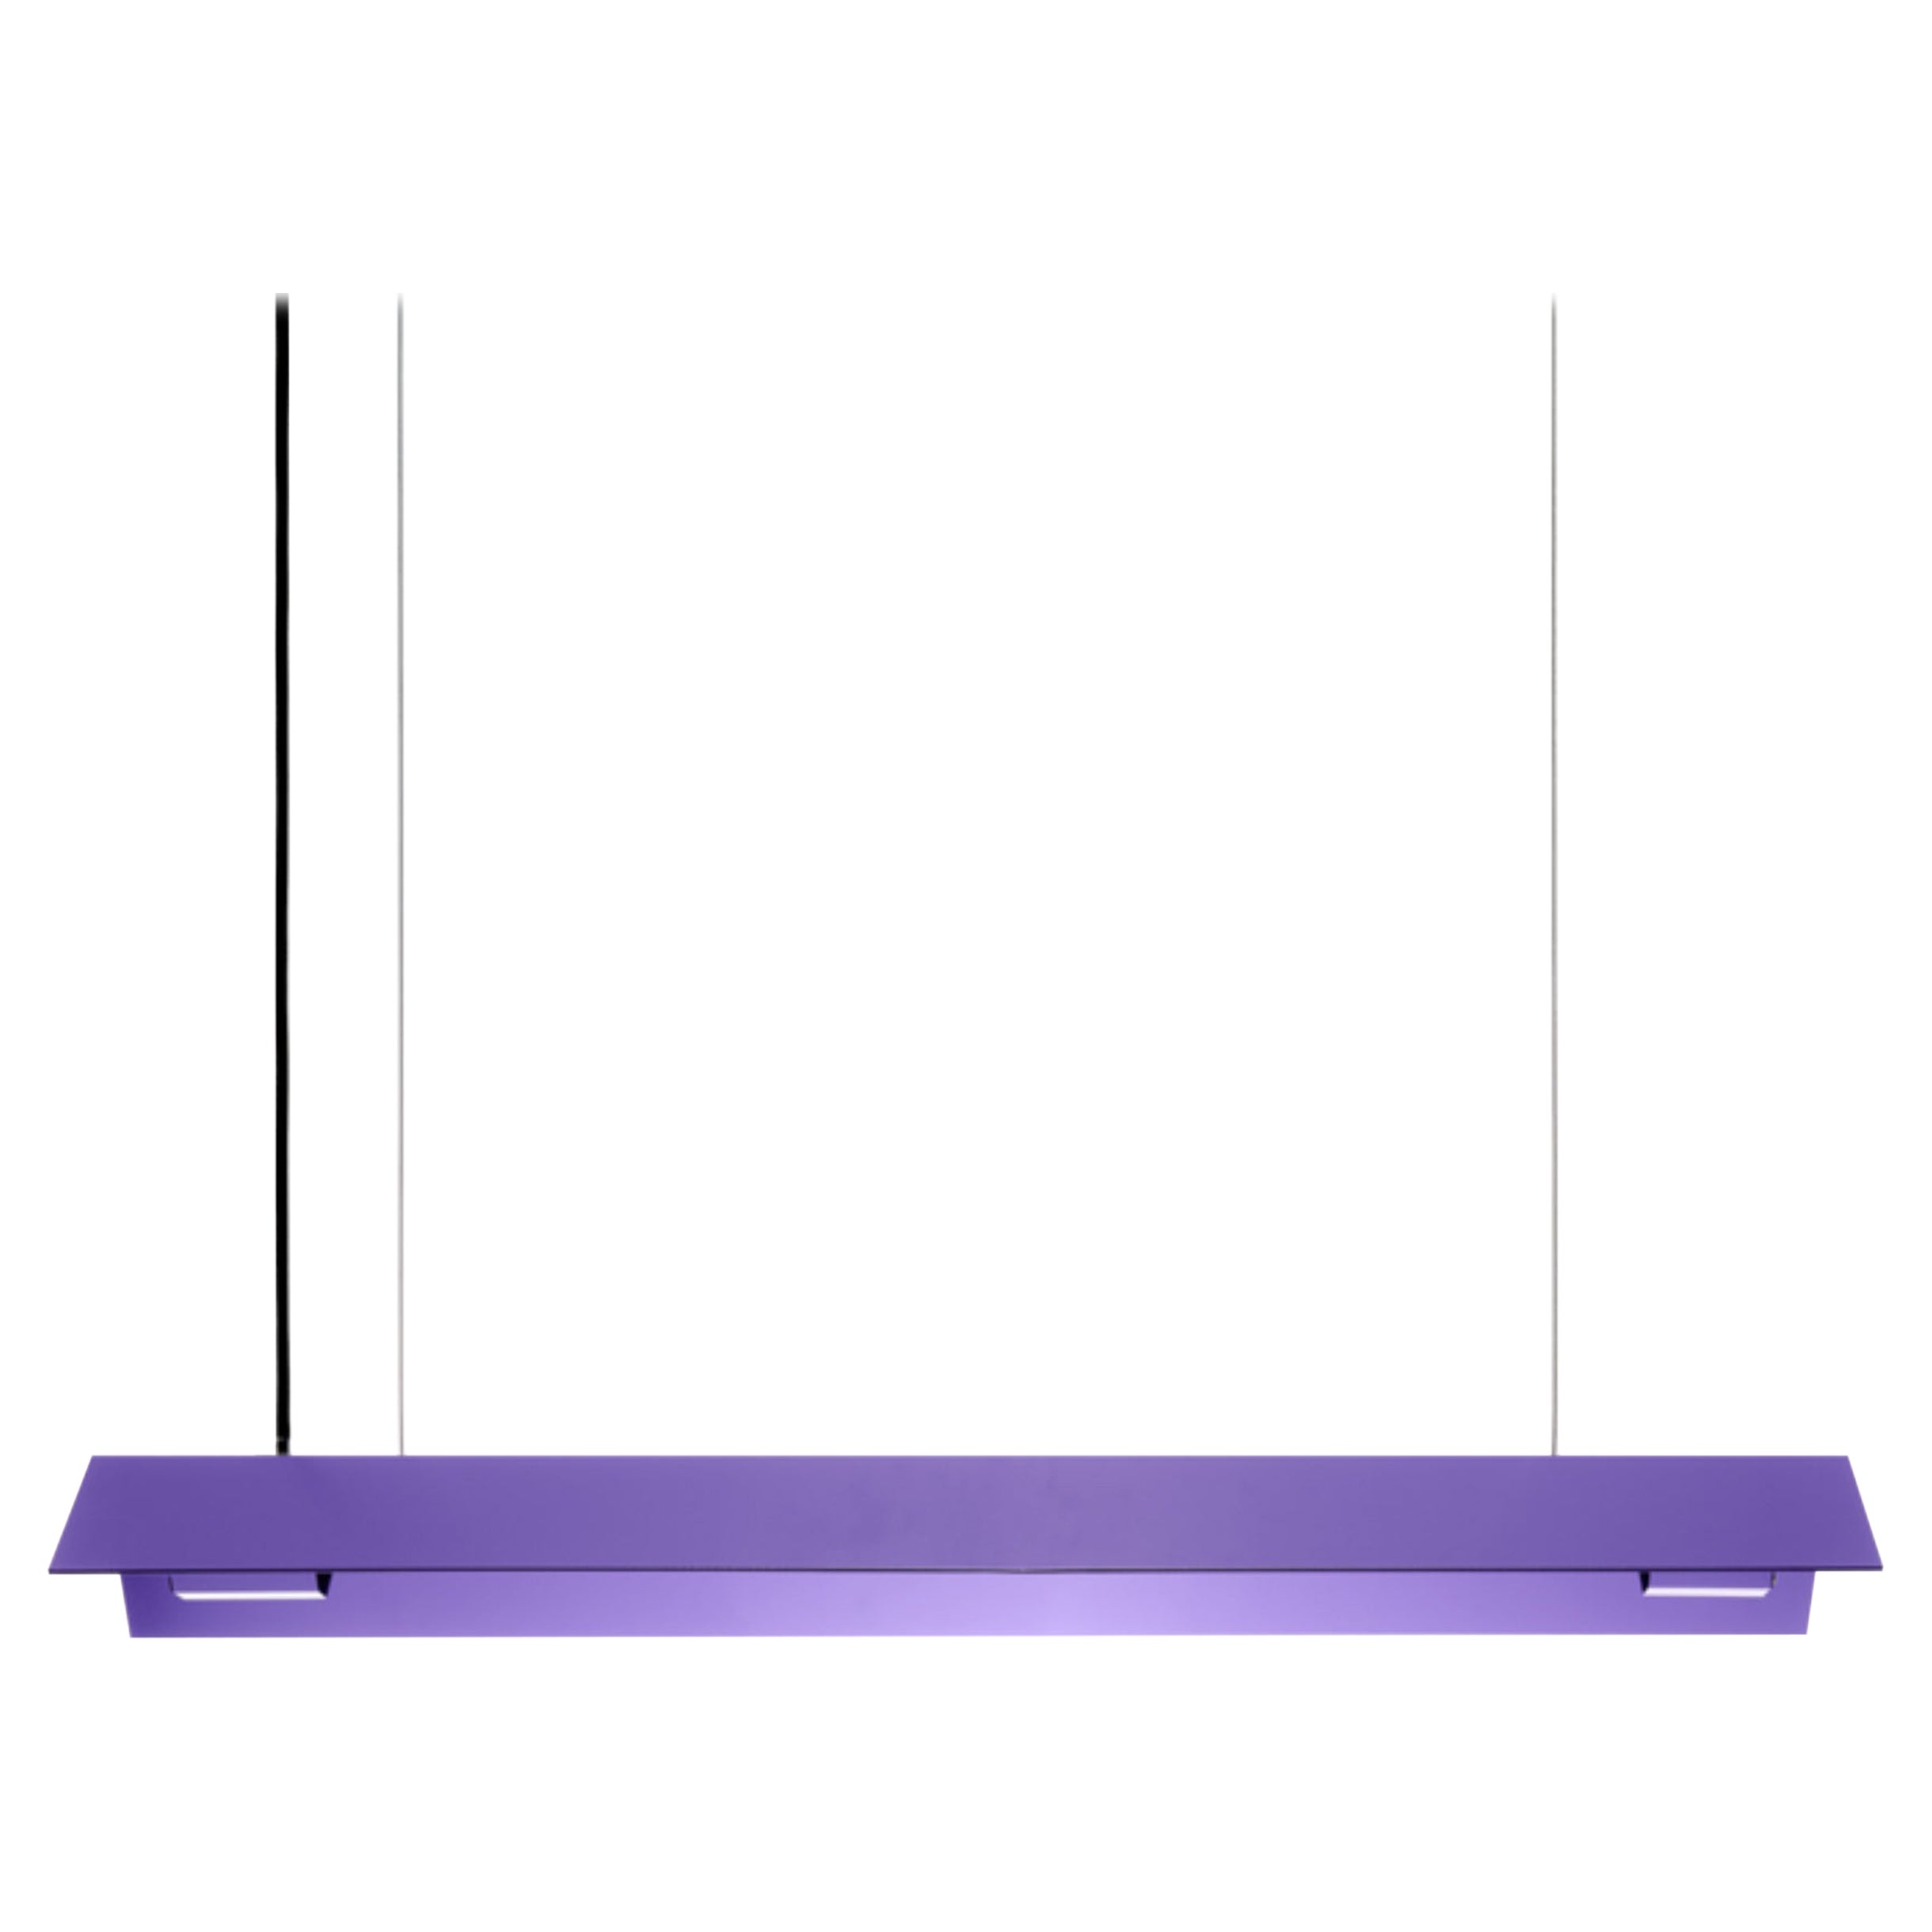 Extra Large Misalliance Ral Lavender Suspended Light by Lexavala For Sale